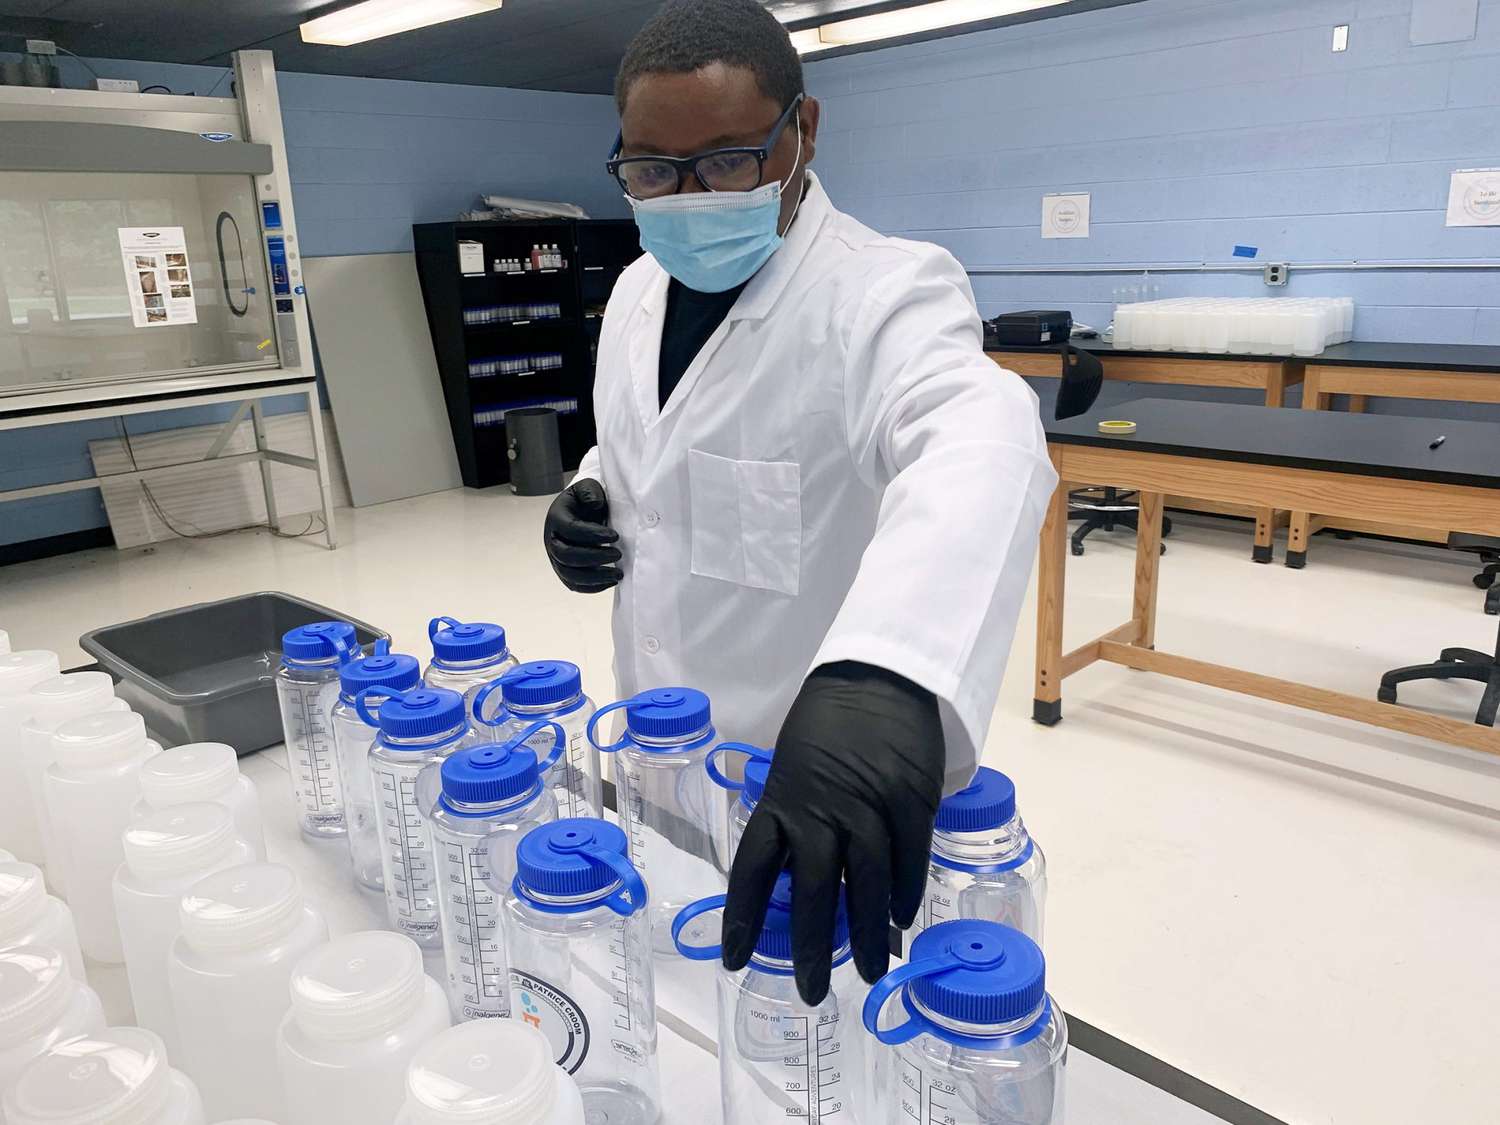 Local Teens Help Solve Flint's Water Crisis with New Lab and Water Testing: 'It Gives Me Hope' - PEOPLE.com